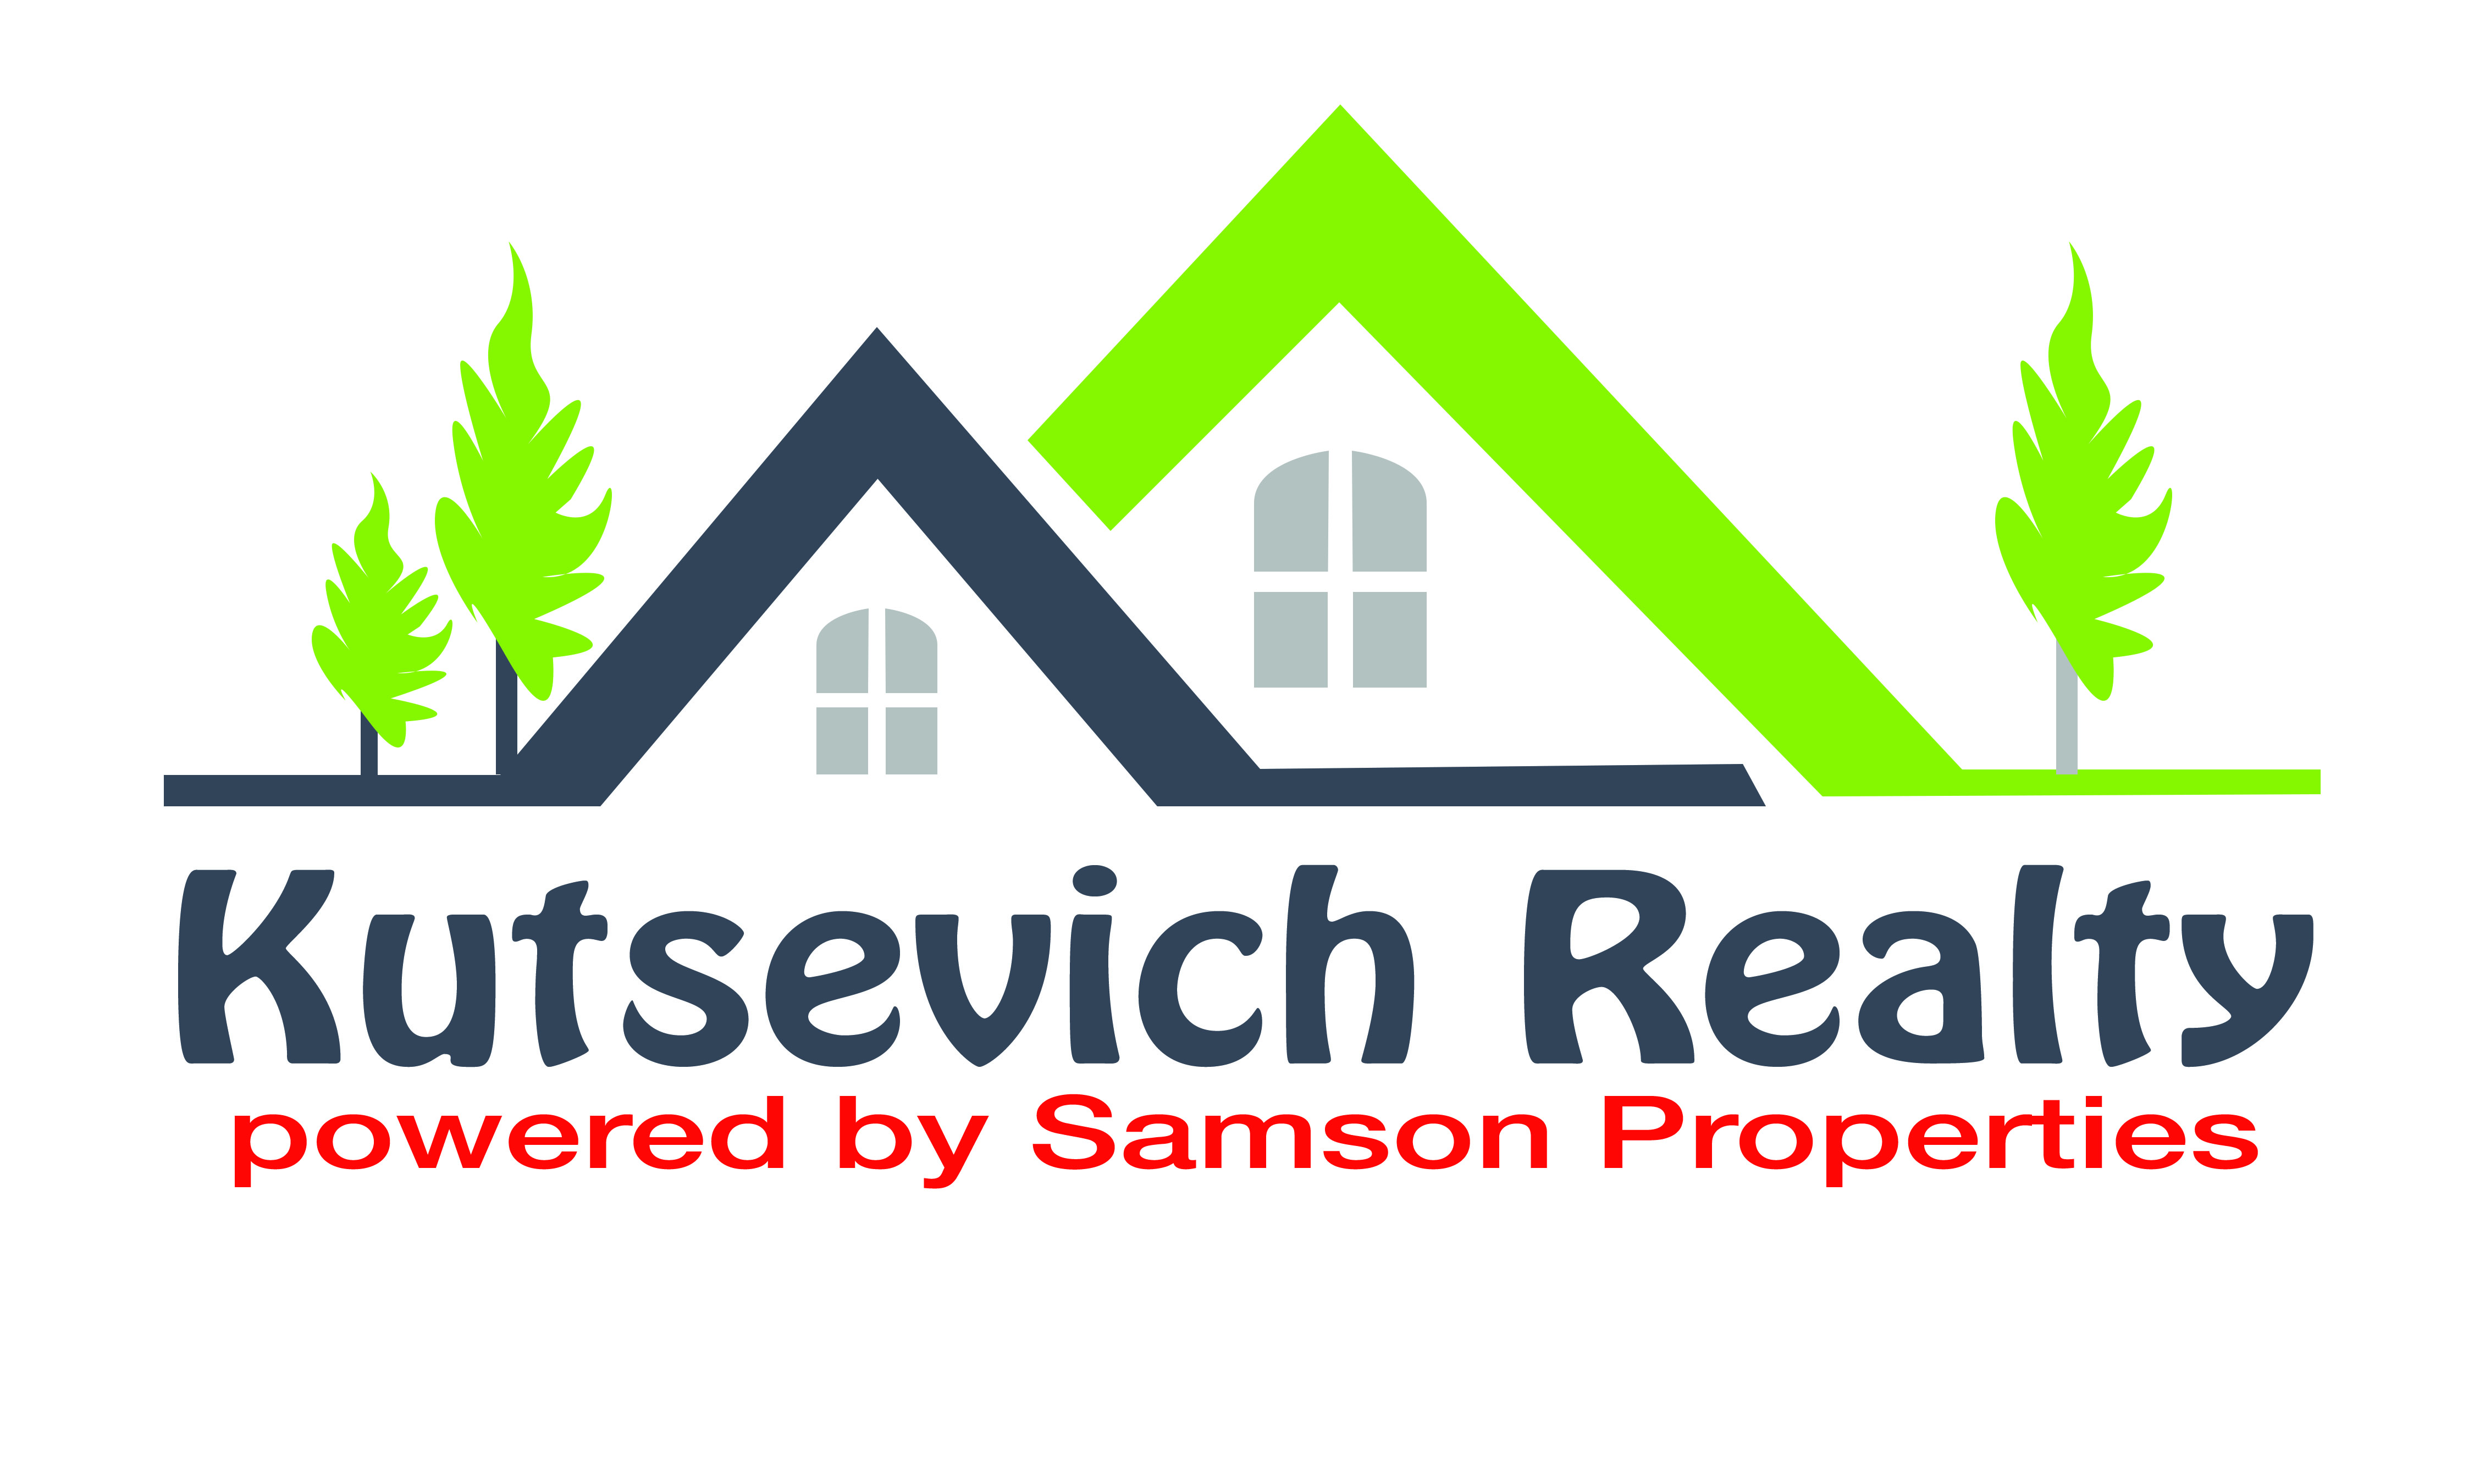 Kutsevich Realty powered by Samson Properties Introduces Services To Help Sell Homes